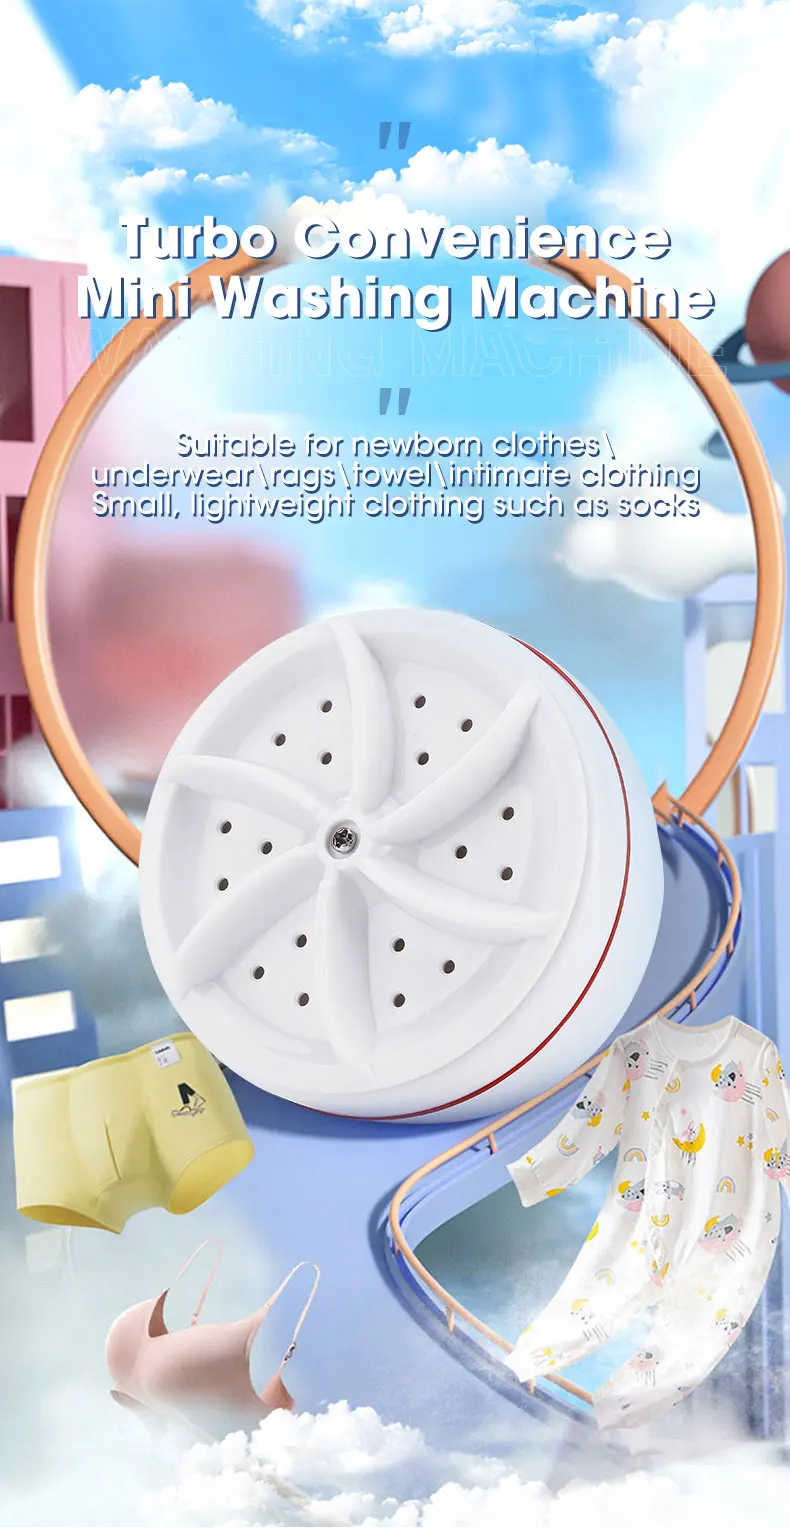 2-in-1 Mini Washing Machine: Portable rotating ultrasonic turbine washer. Compact and versatile laundry solution. Ideal for travel and small spaces.